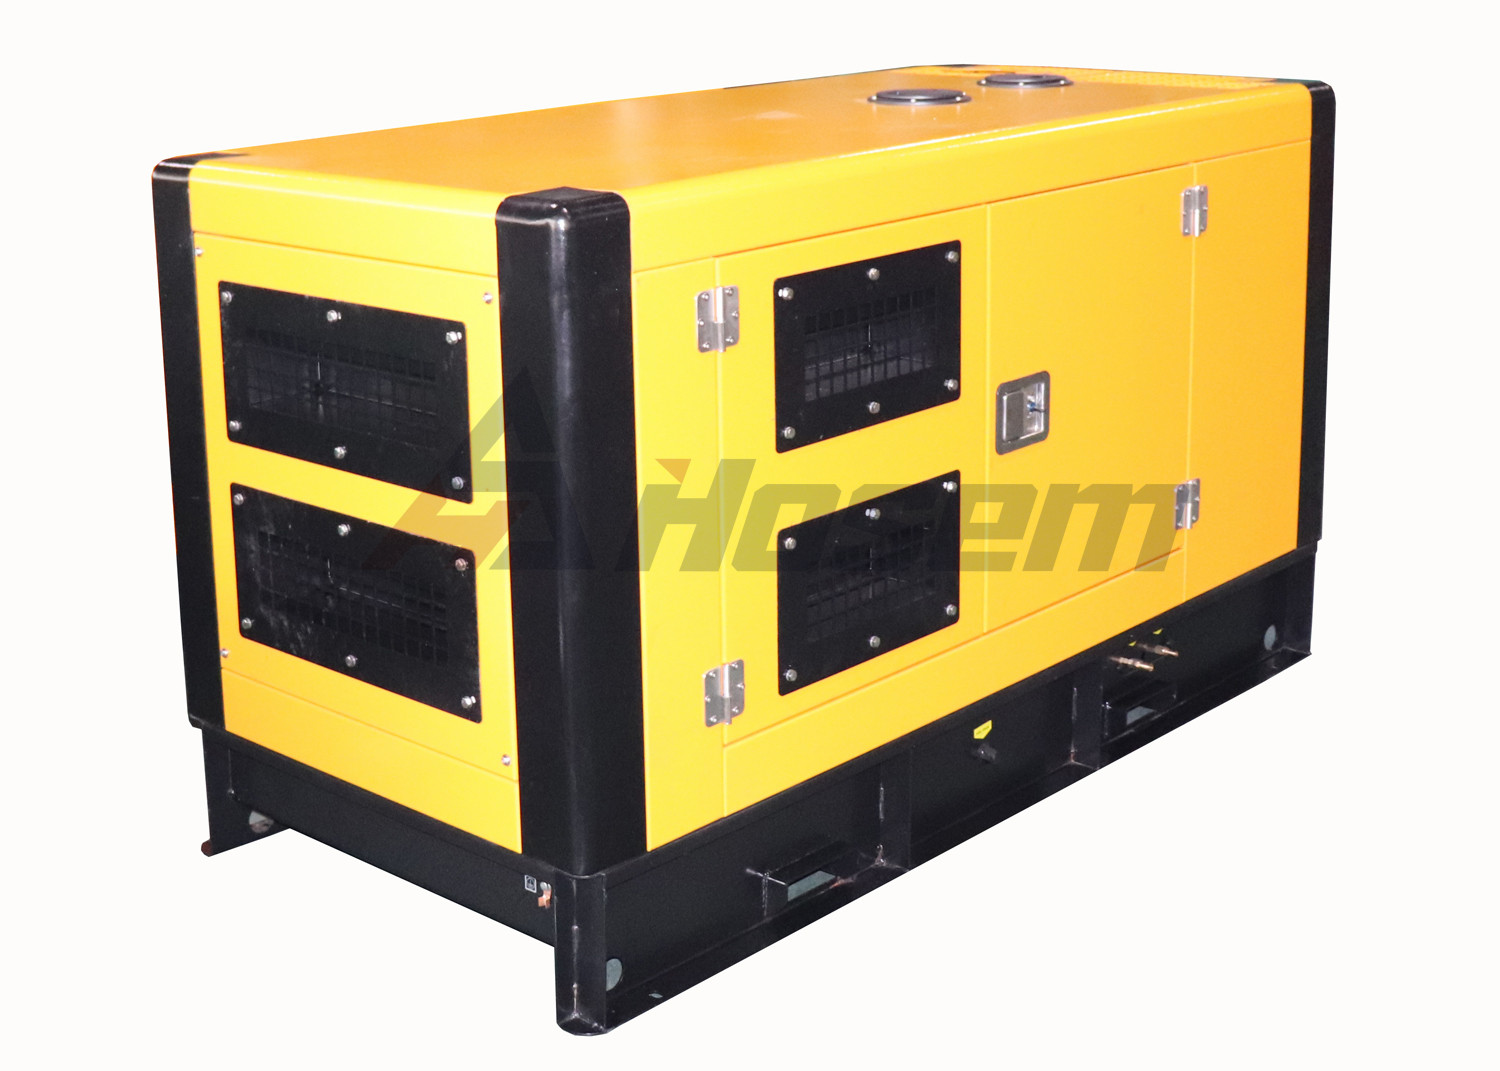 Cummins Industrial Generator Rate Output 50kW For Factory